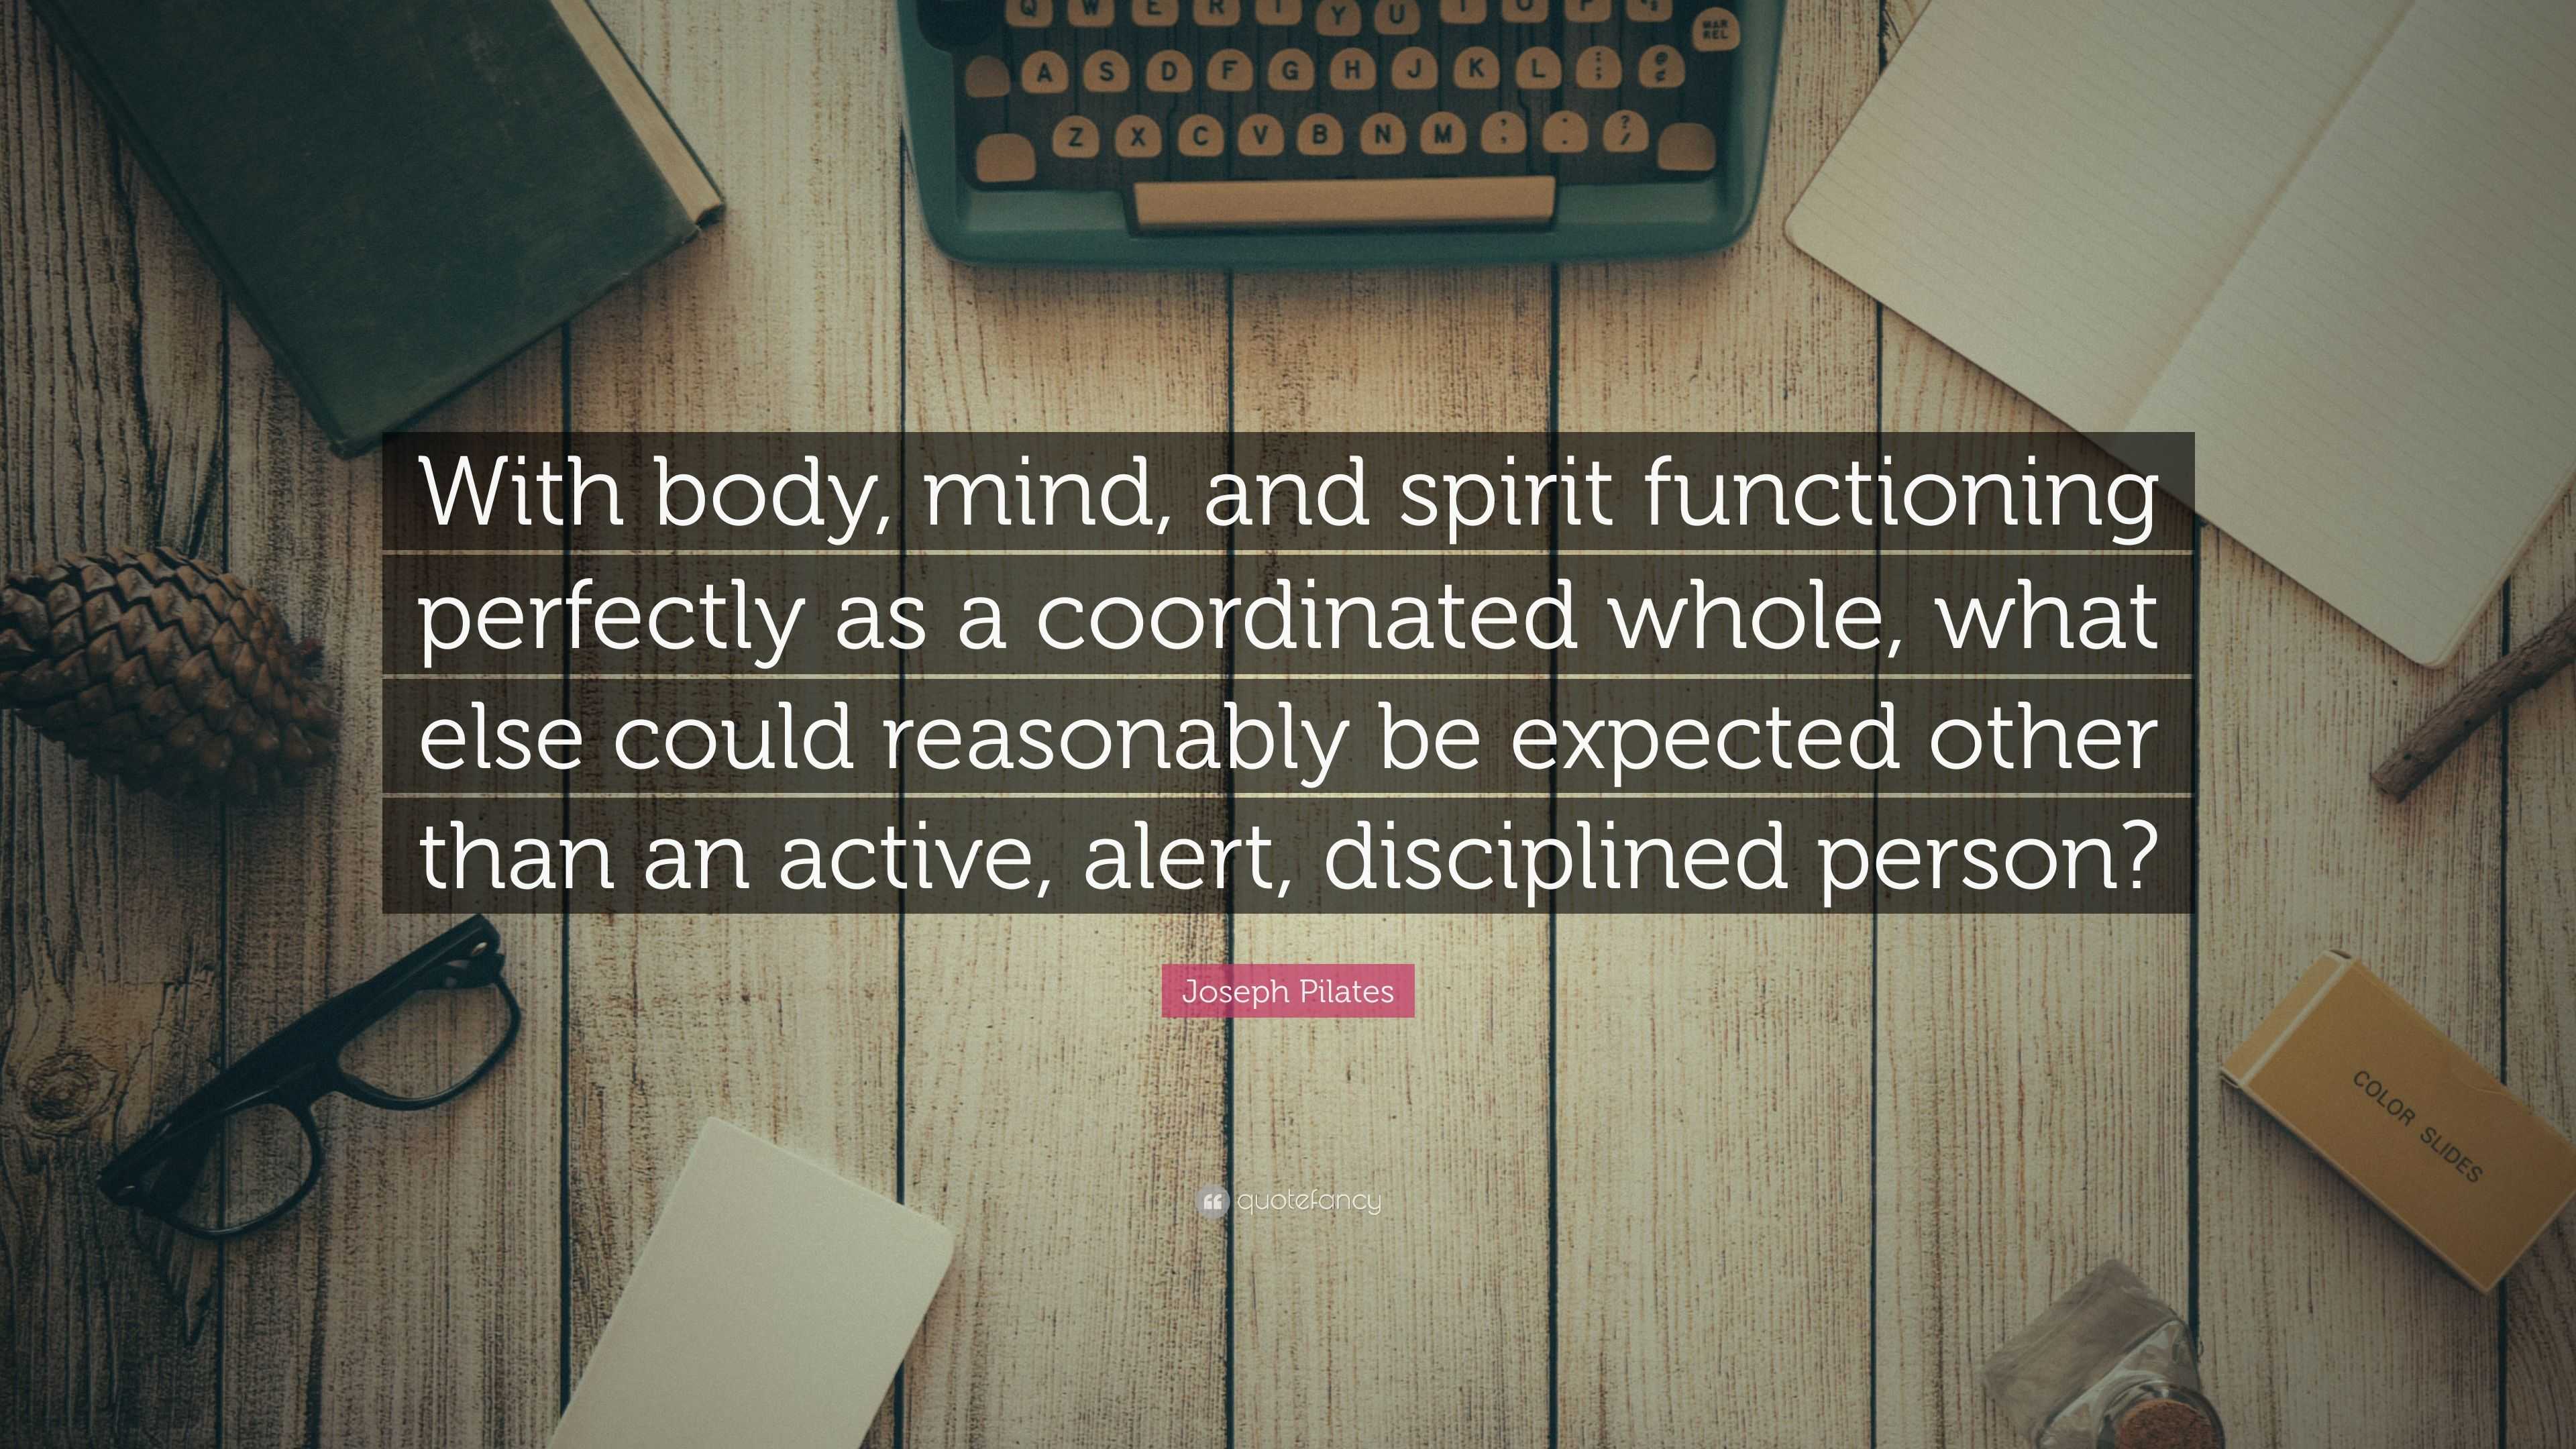 Joseph Pilates Quote: “With body, mind, and spirit functioning perfectly as  a coordinated whole, what else could reasonably be expected other t”